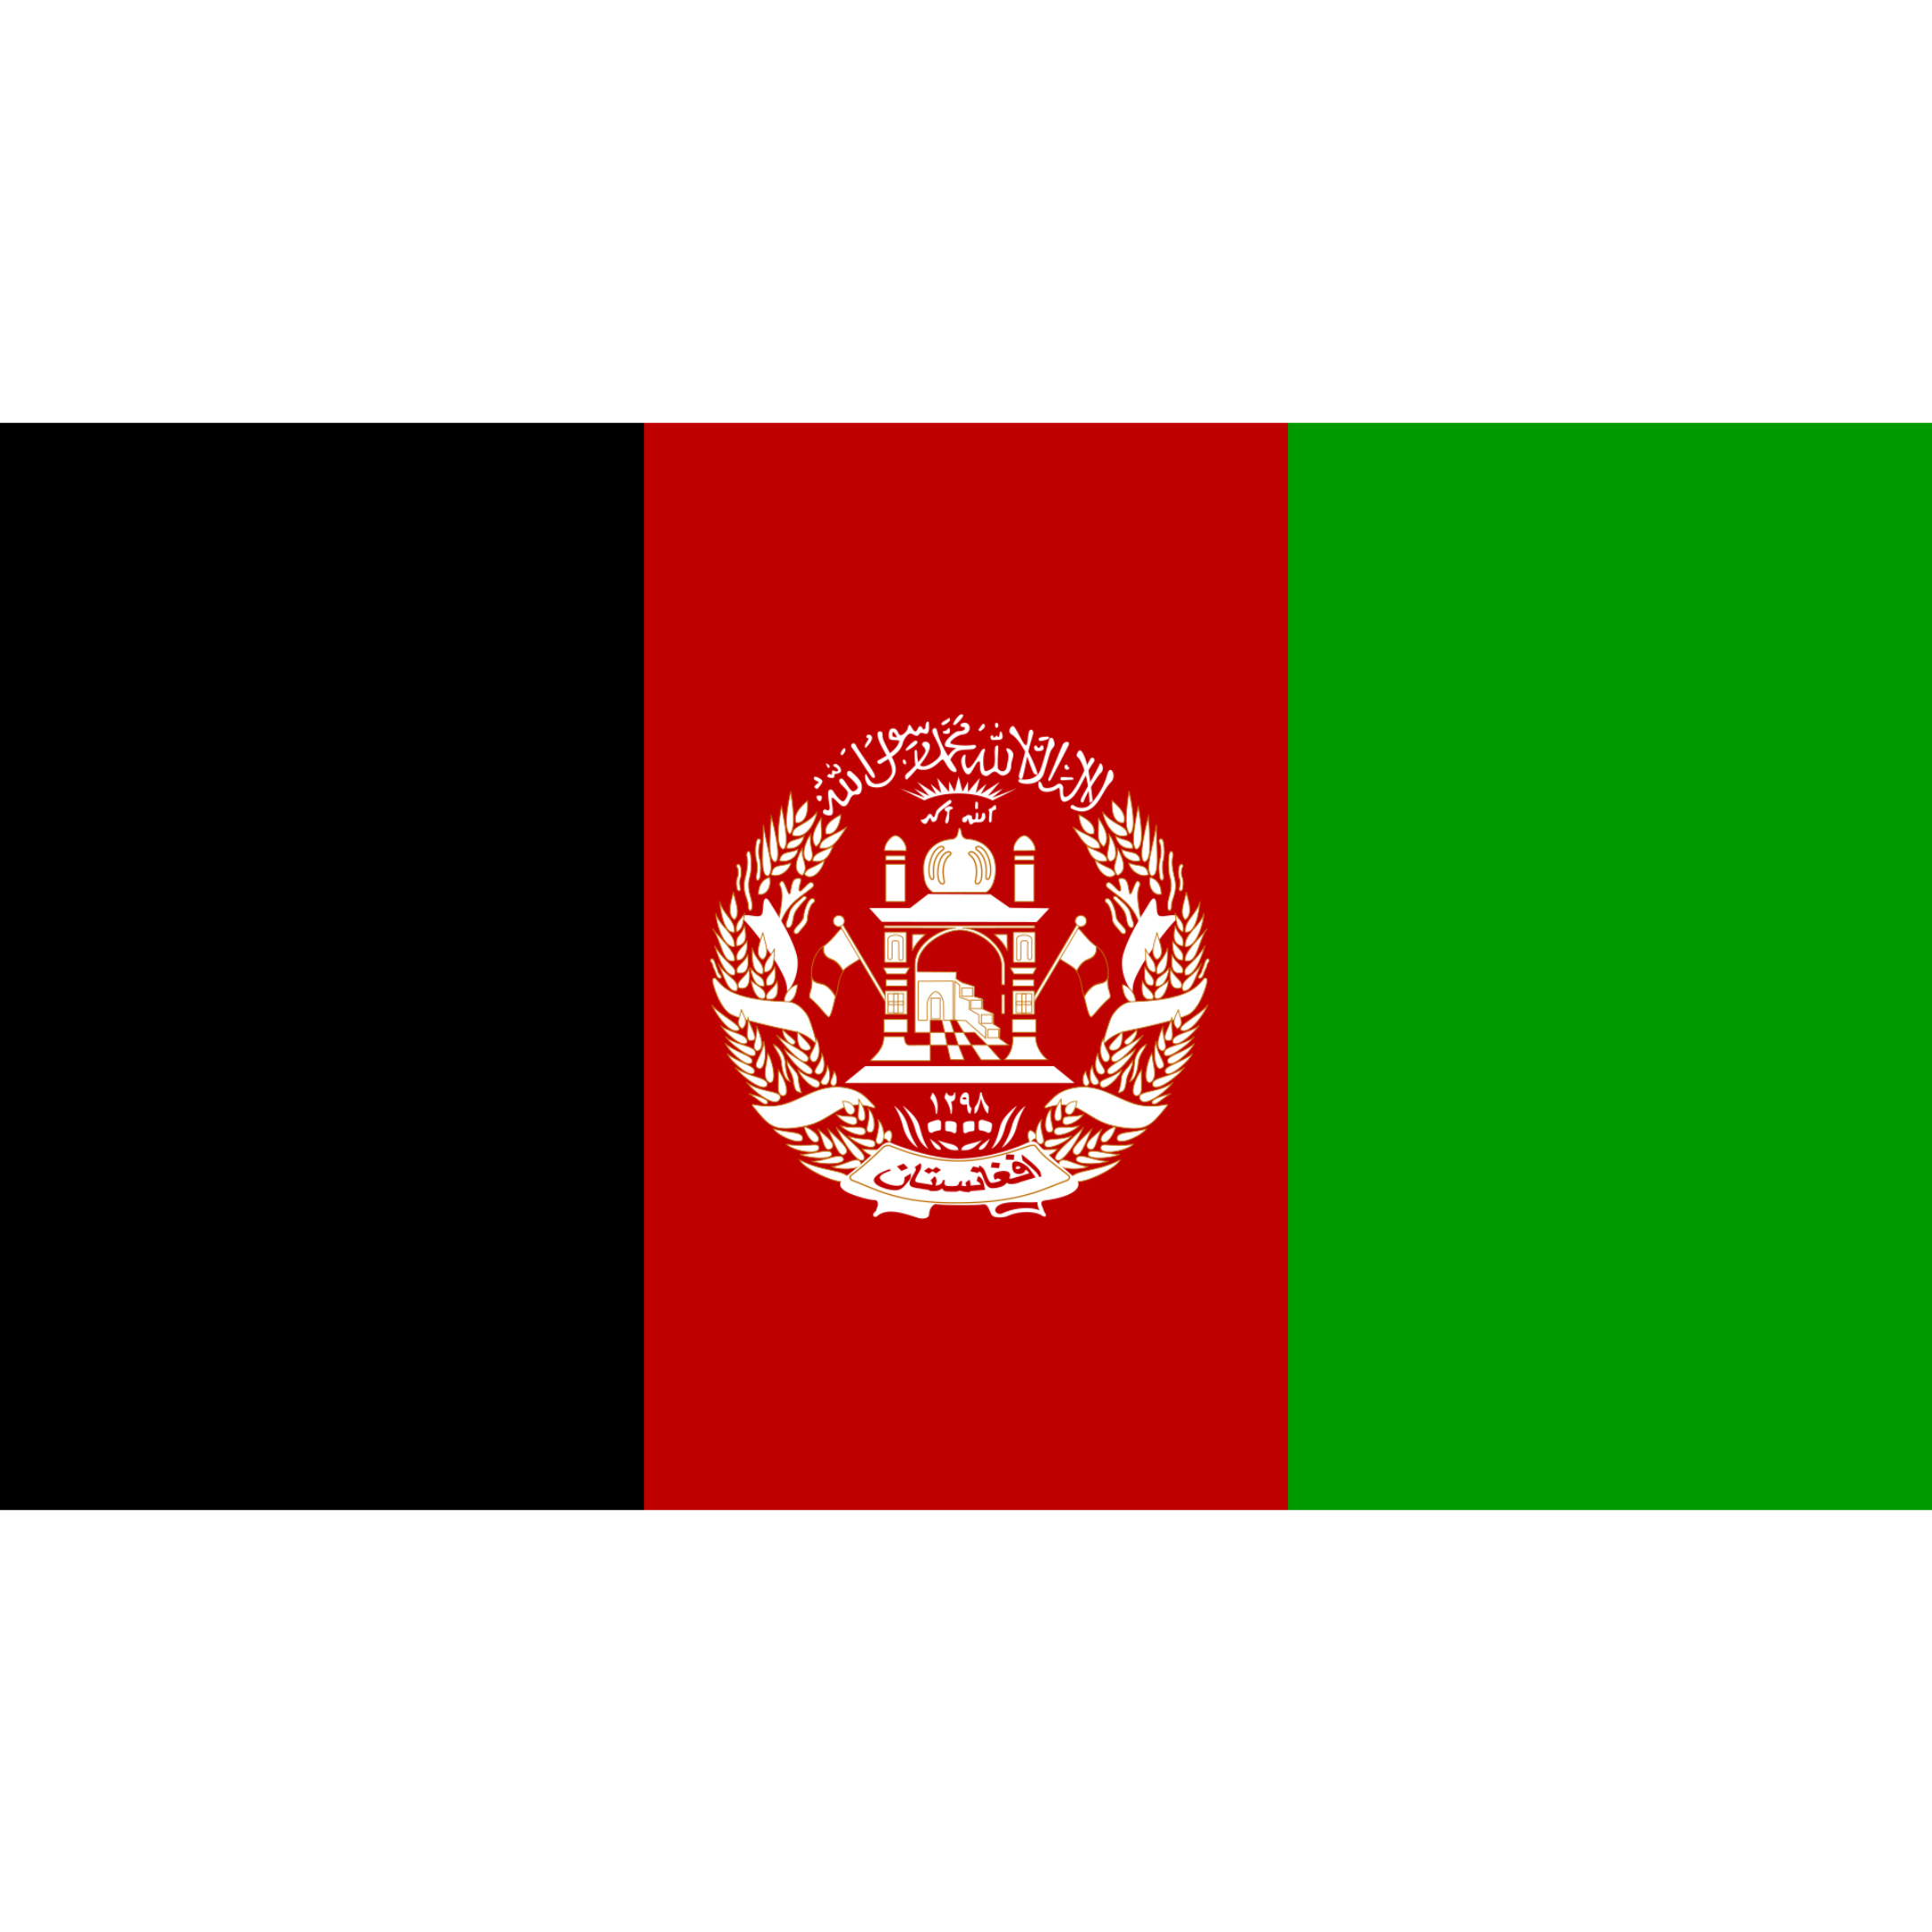 The flag of Afghanistan consists of 3 vertical stripes in black, red and green with a central coat of arms.